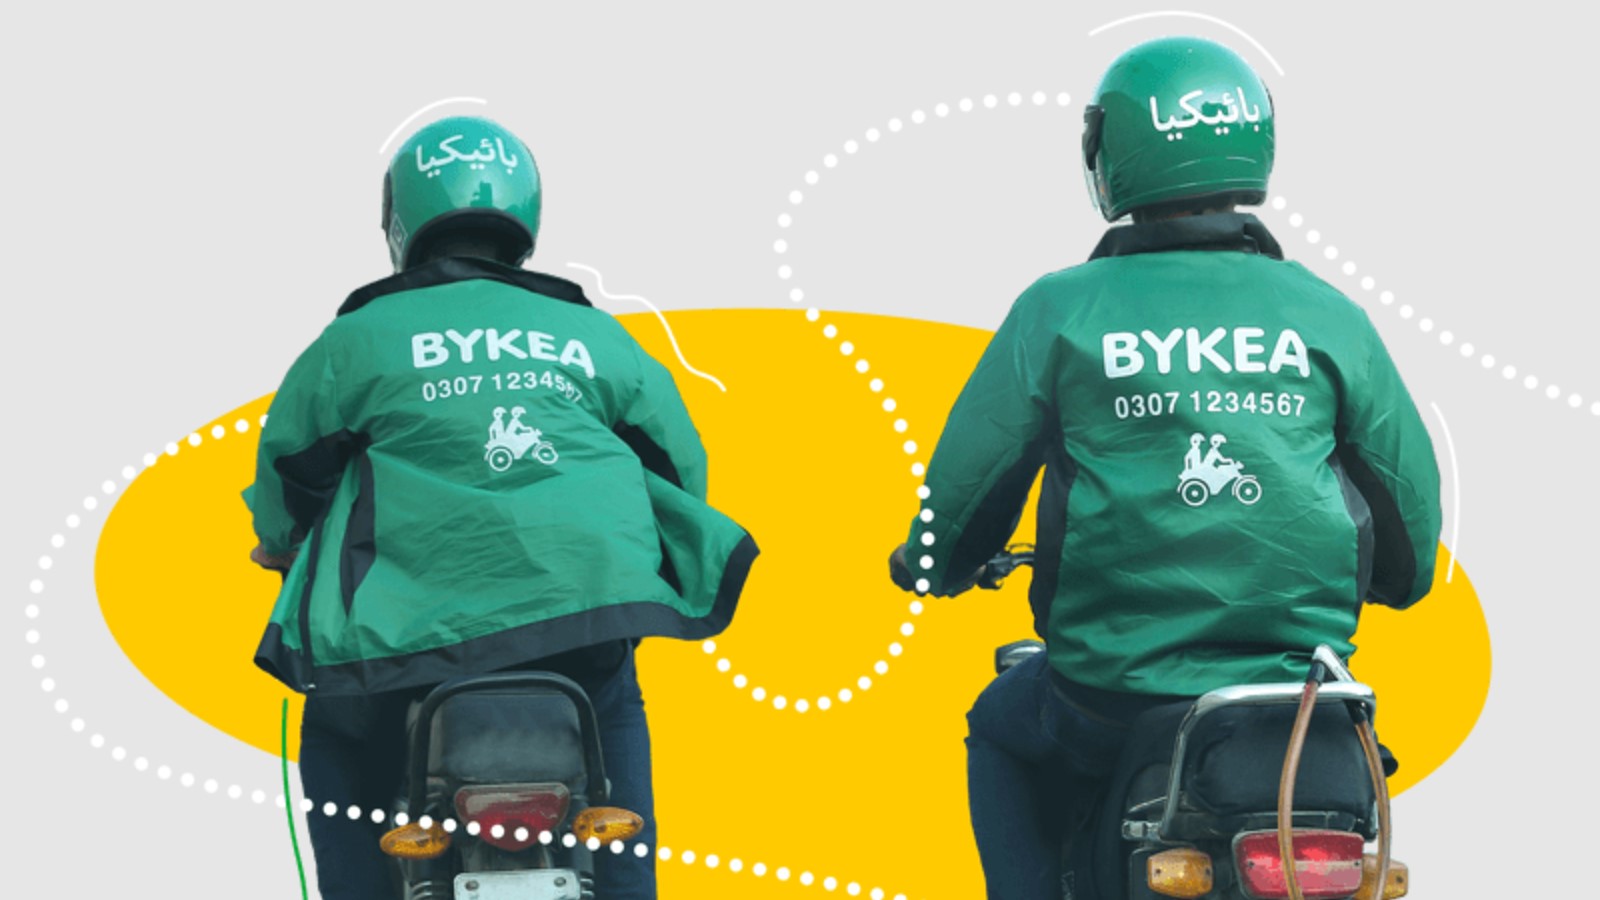 Ride Hailing Firm Bykea Leaked Out Sensitive Data Of Drivers And 